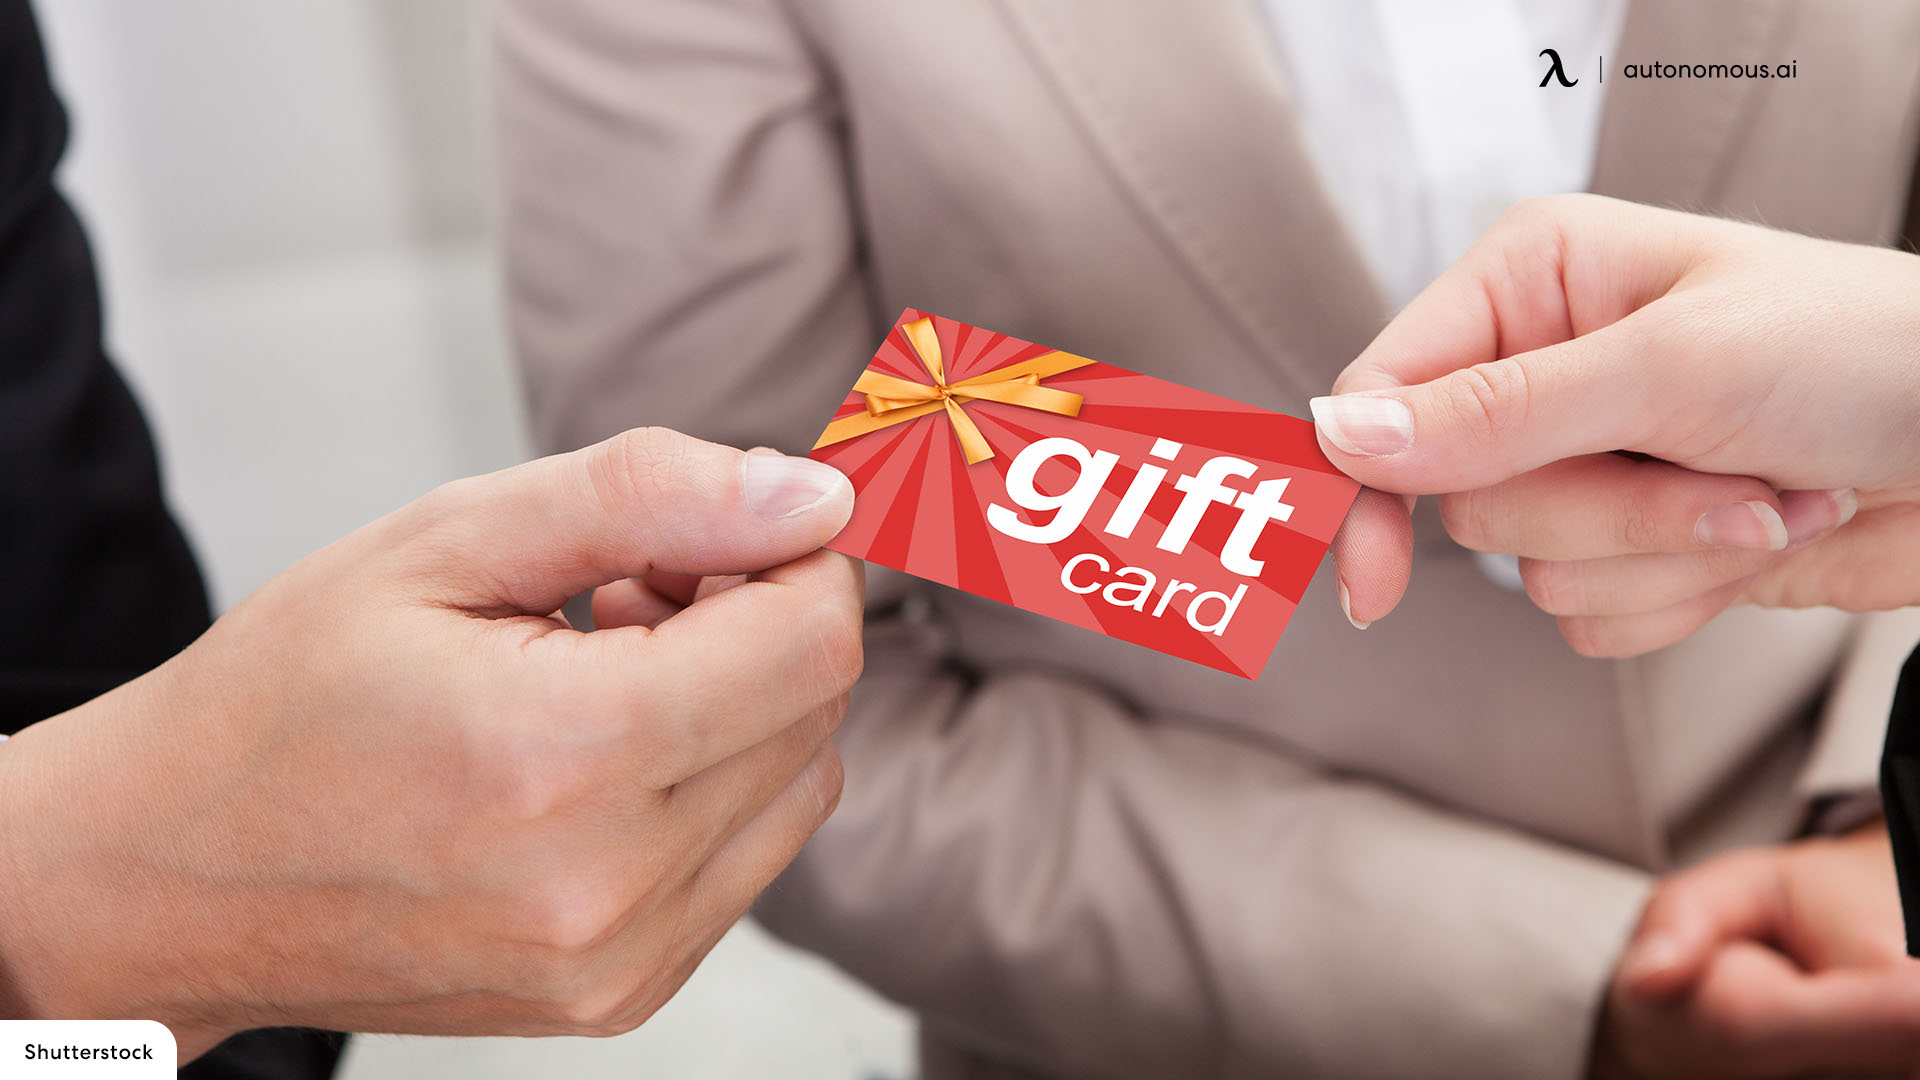 Offer exclusive gift cards